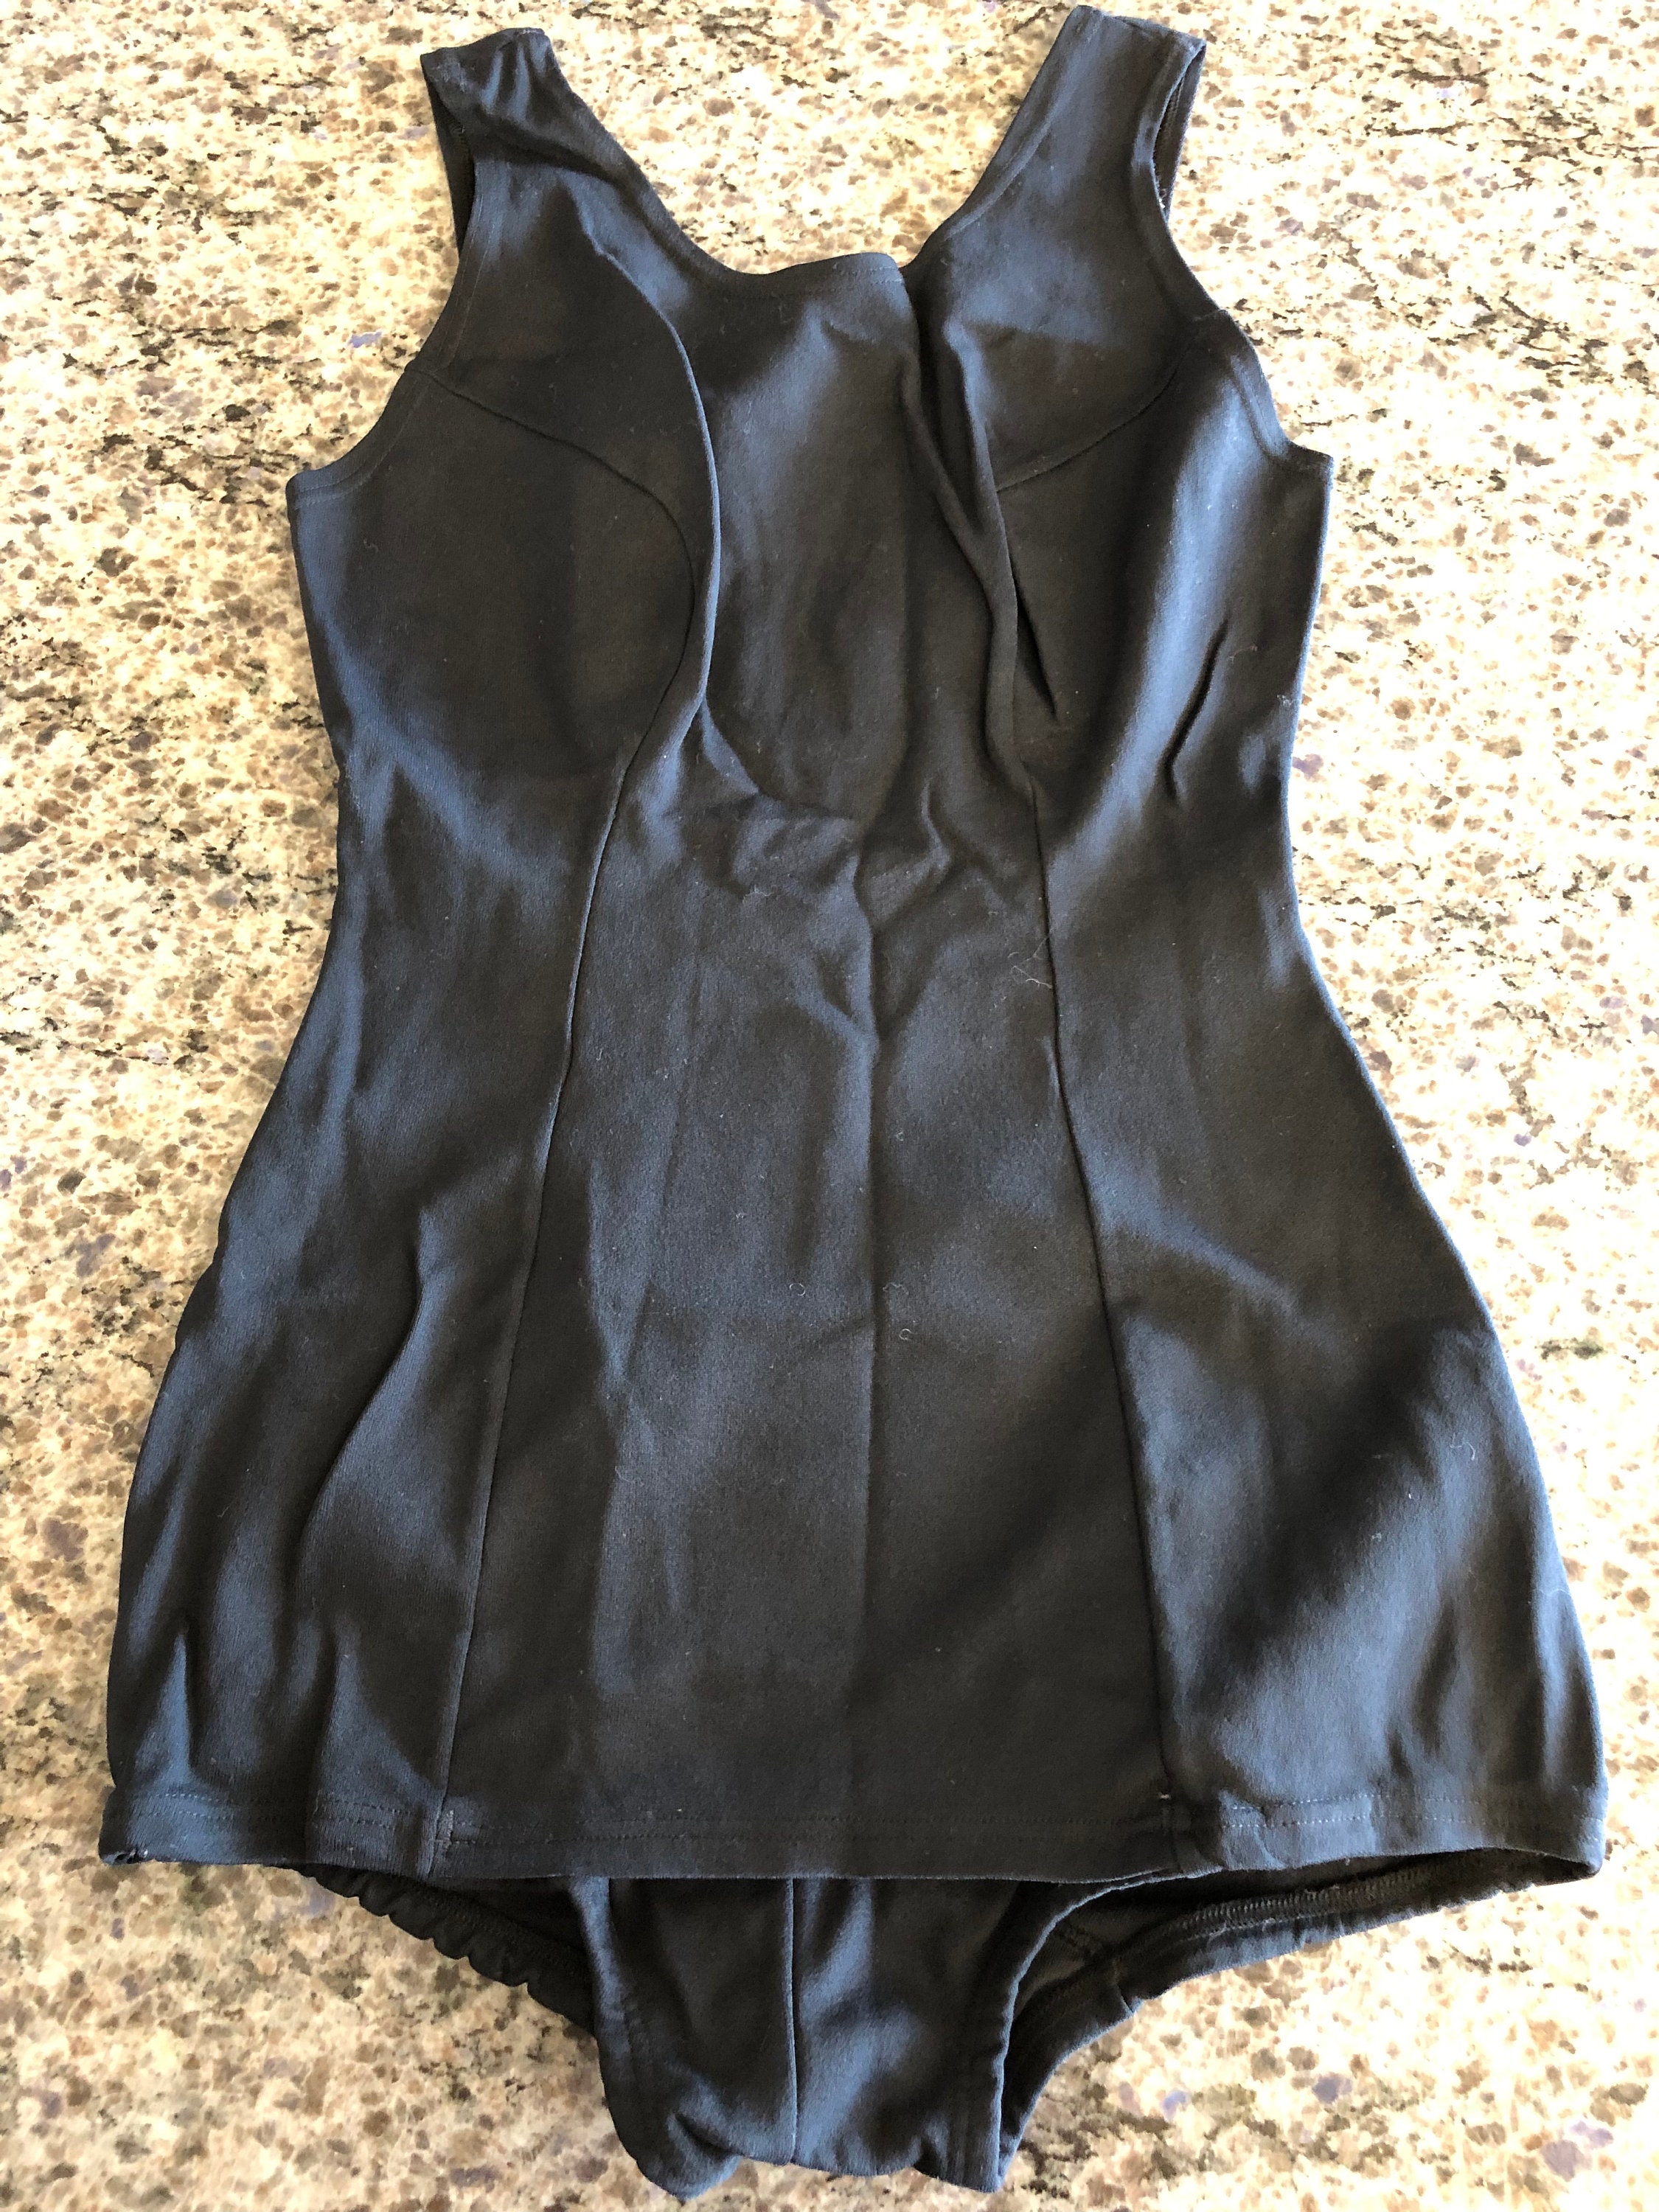 RARE Vintage 1950's Solid Black One Piece Swimsuit from Cal State Long  Beach Swim Team Broderick Number 34- college swim team swimsuit